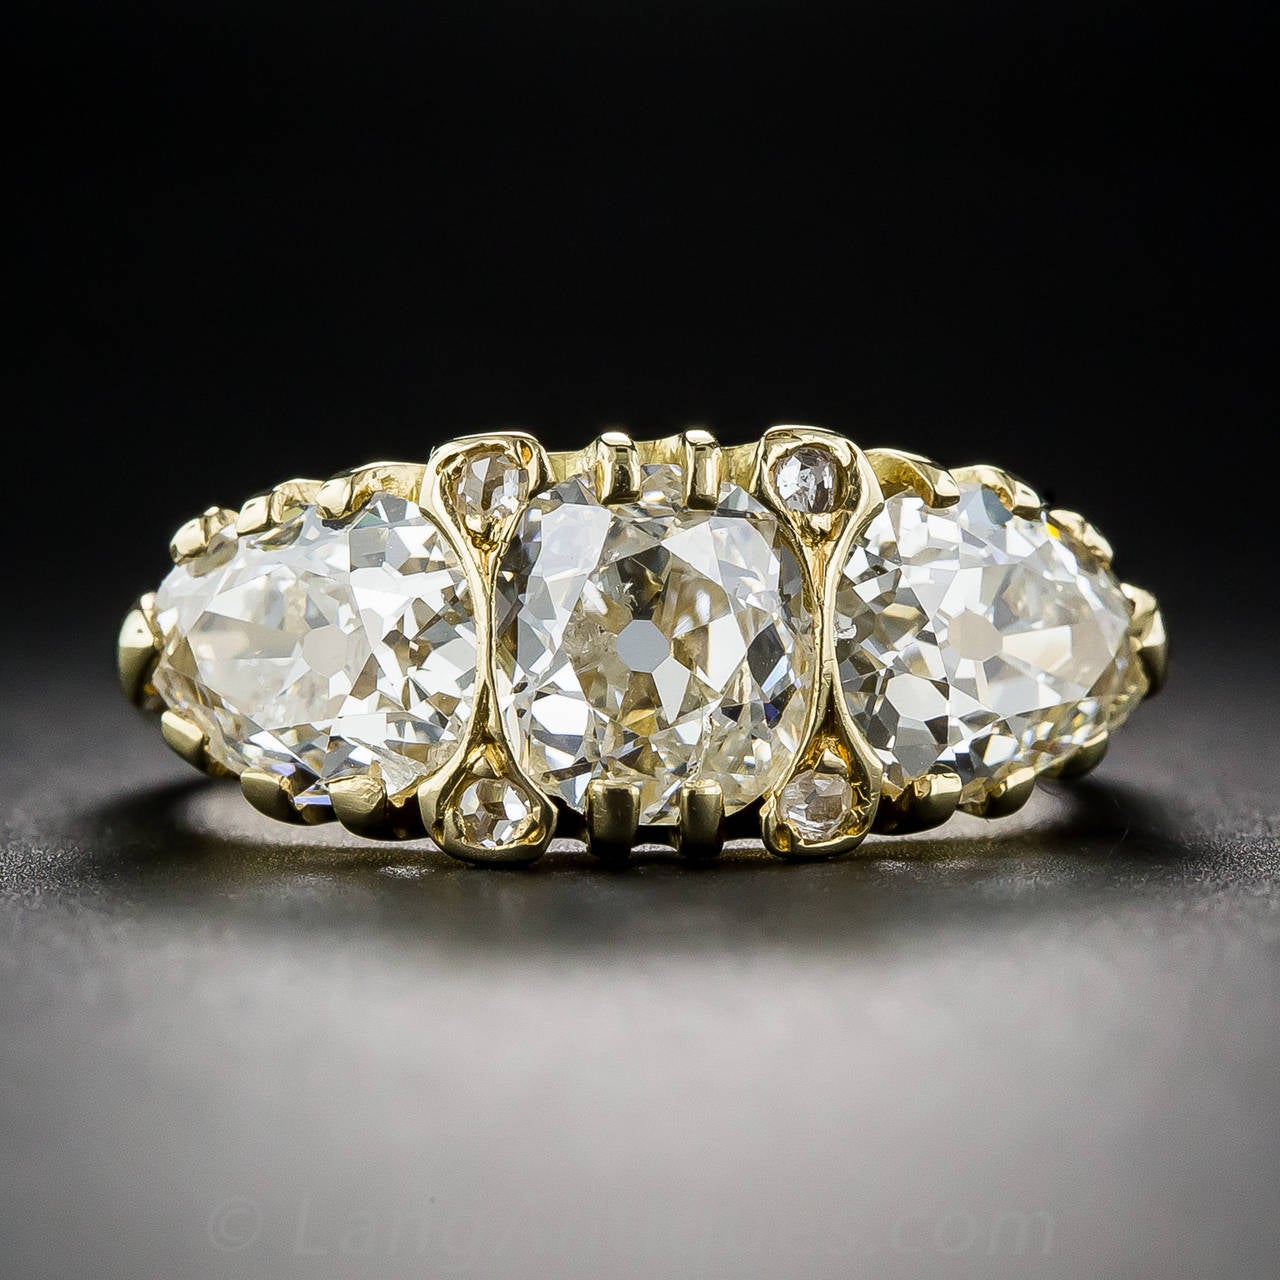 A dazzling trio of early-20th century diamonds: a 1.00 carat antique cushion in the center, and on the sides, two old mine pear shapes together weighing 1.60 (but they present all of 1 carat each), sparkle in all directions in this classic 18K